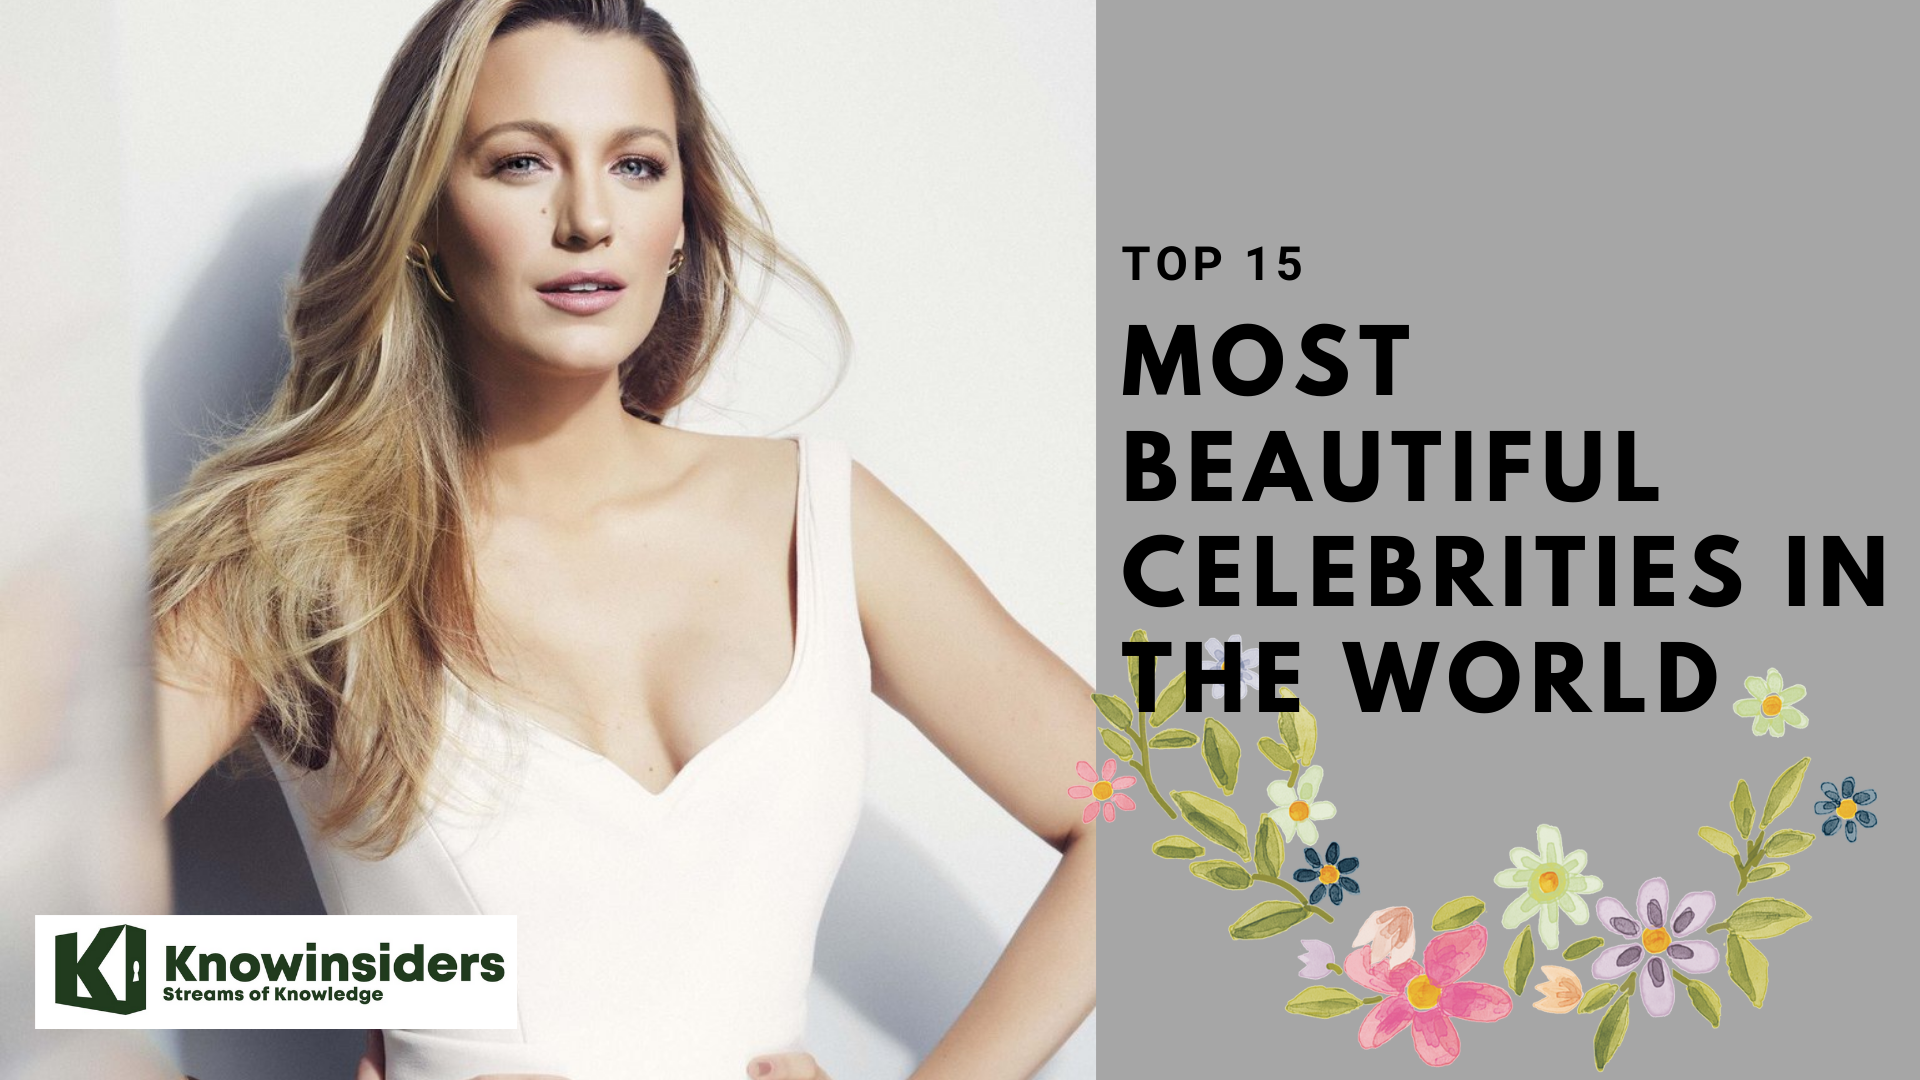 Top 15 Most Beautiful Celebrities In The World